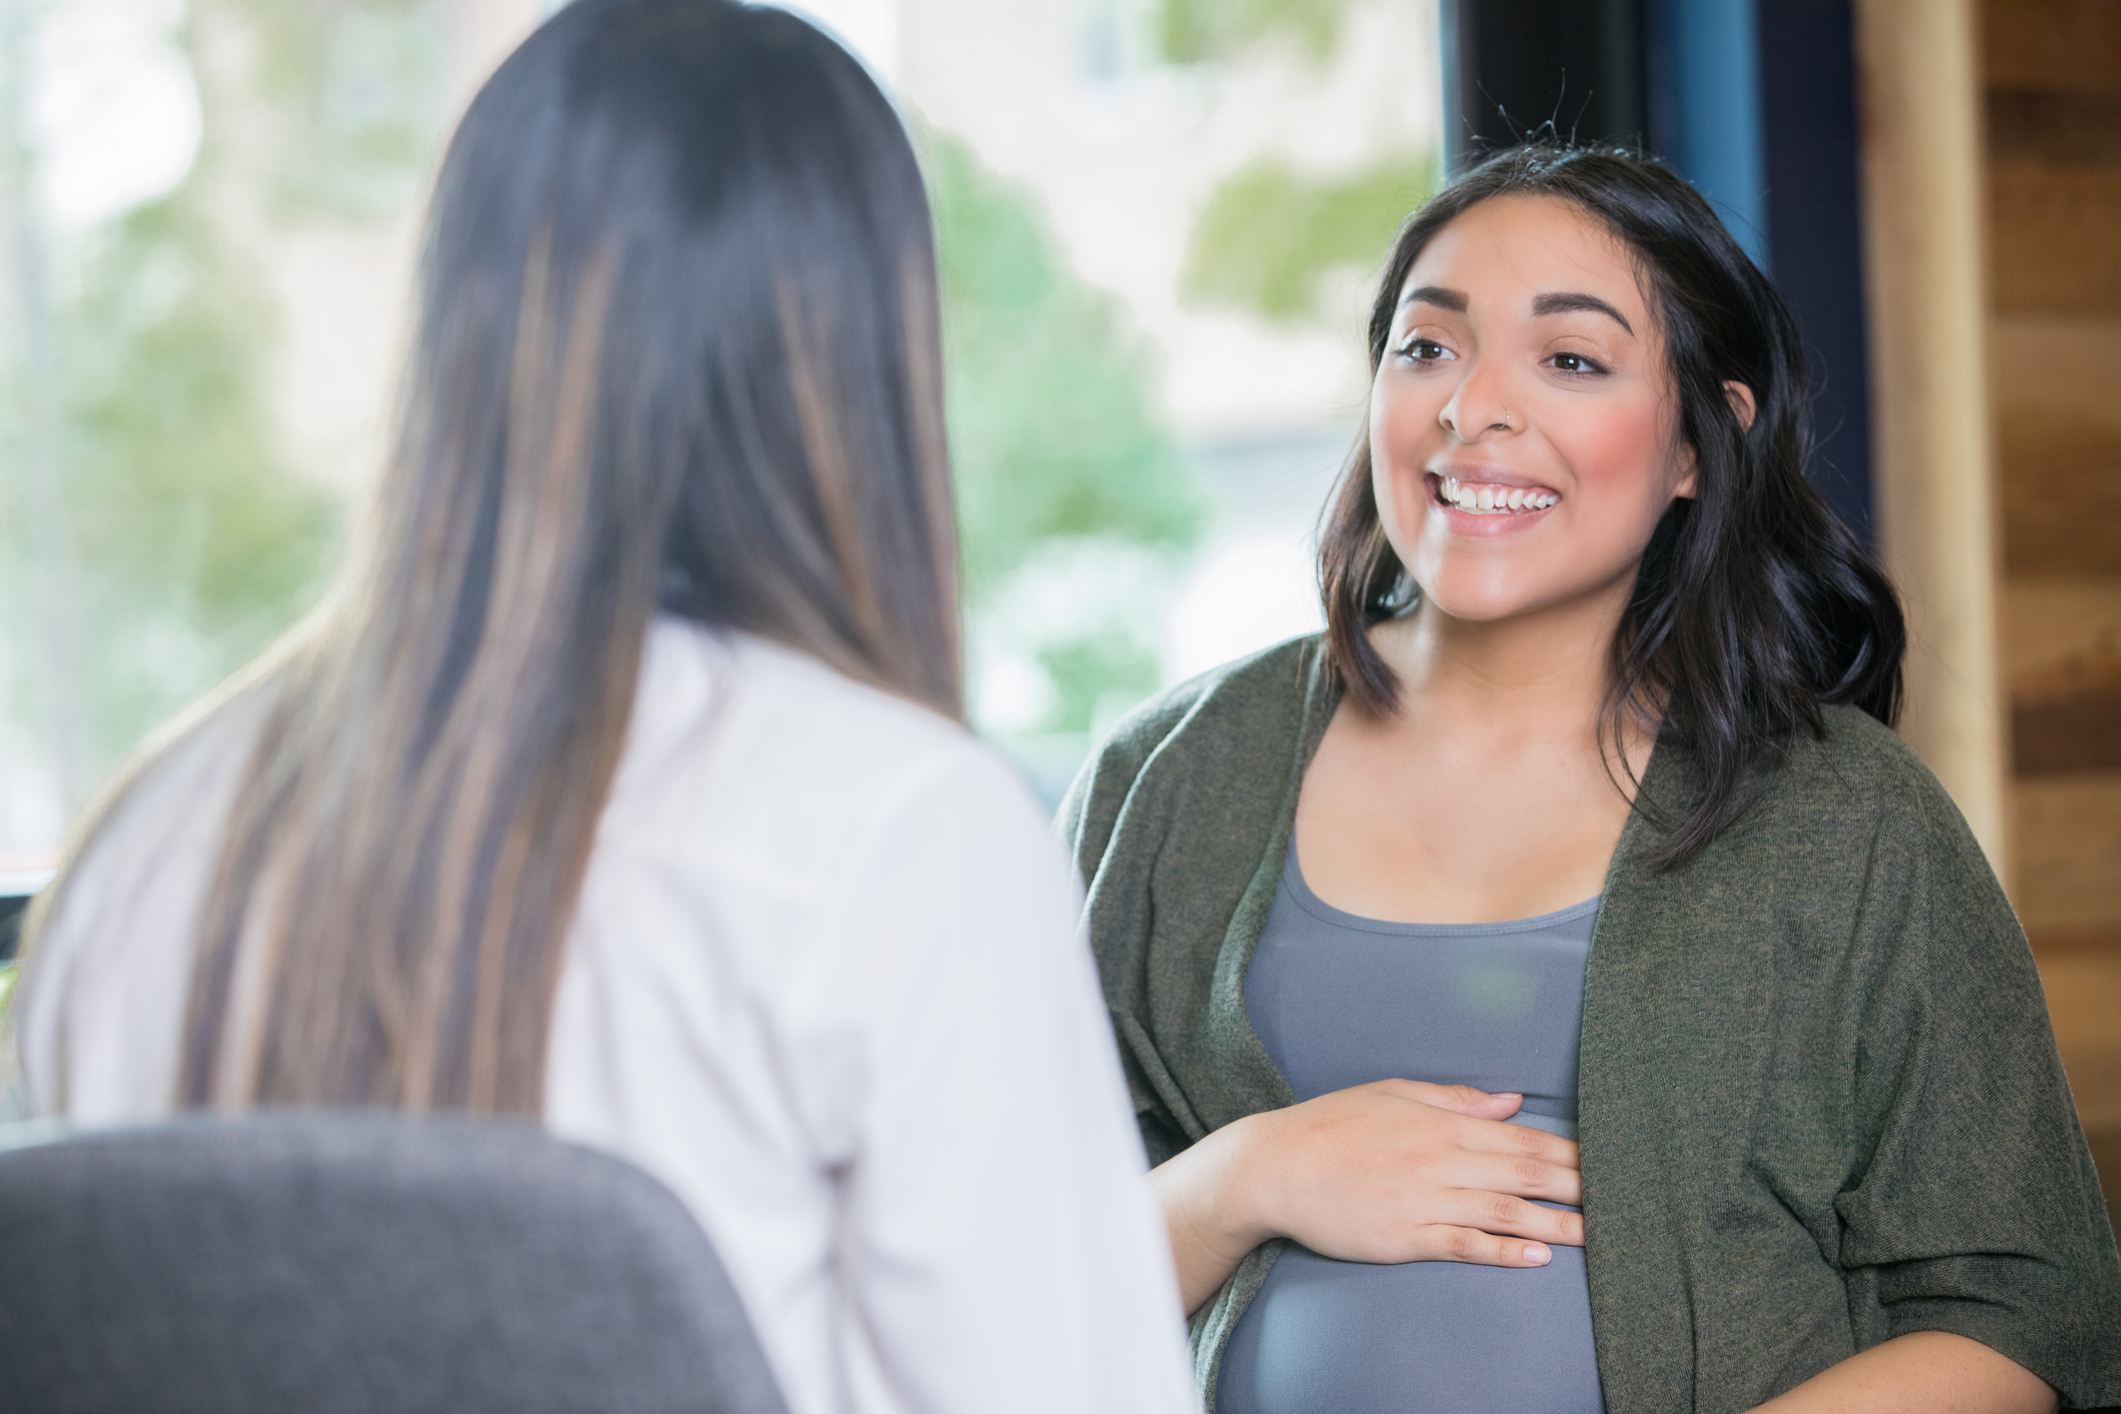 Expectant mothers can find emotional support for their adoption in Baton Rouge!